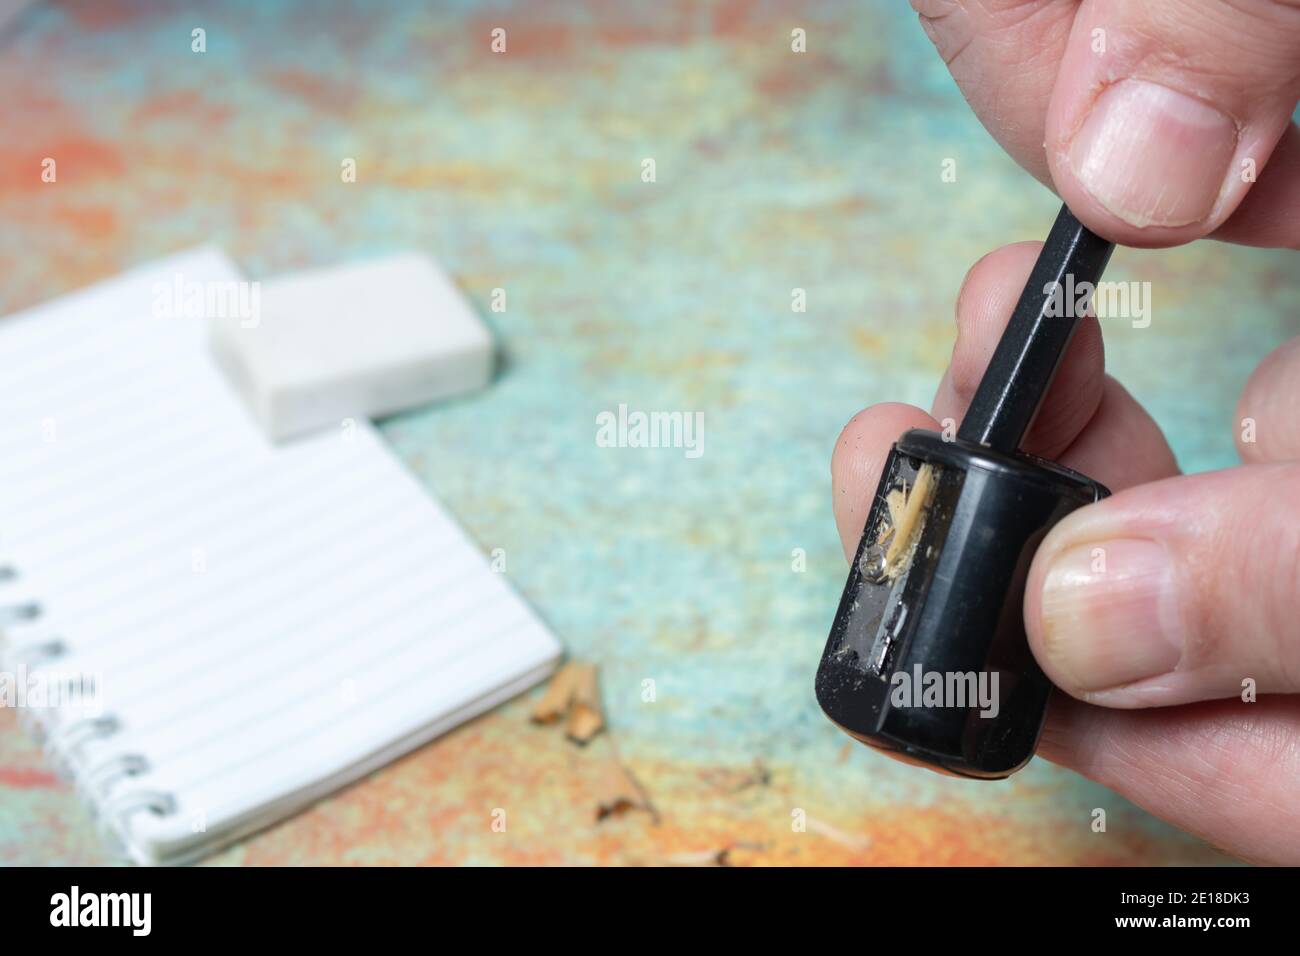 Hands performing the action of sharpening a pencil with a standard pencil sharpener. Stock Photo